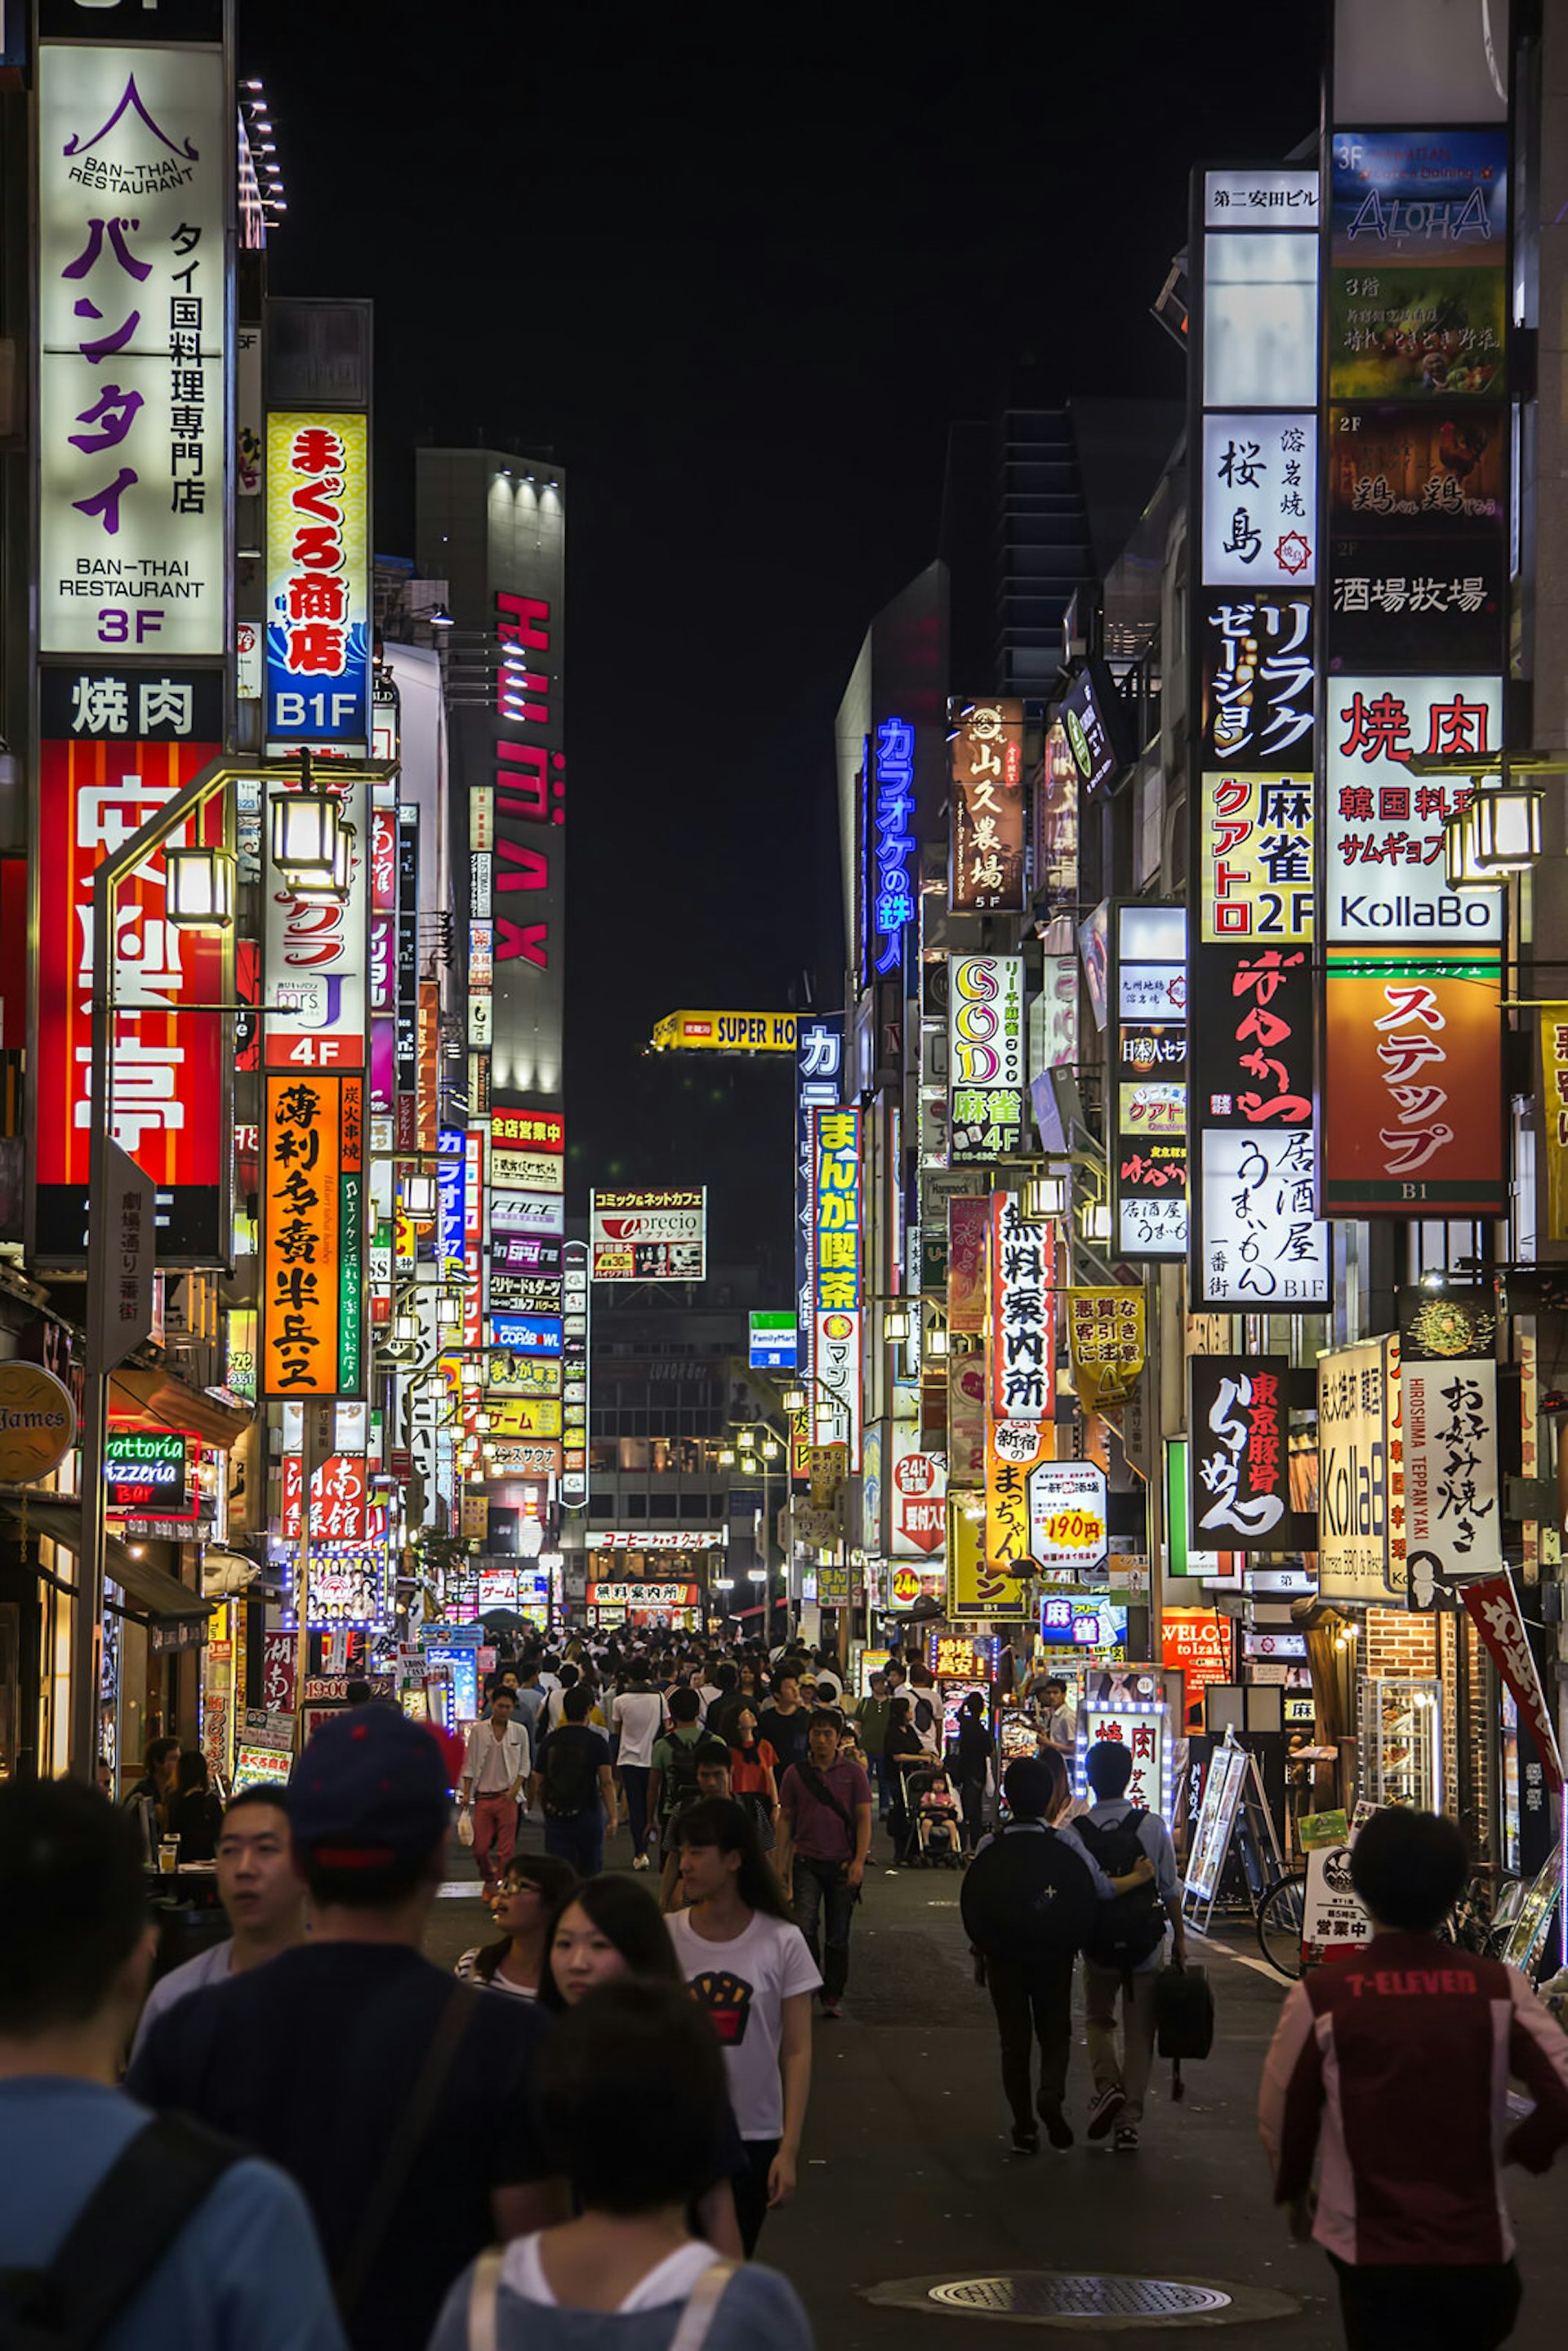 Countless bright lights and signs line the tall buildings along a narrow street in Shibuya, Tokyo © Goran Bogicevic / Shutterstock